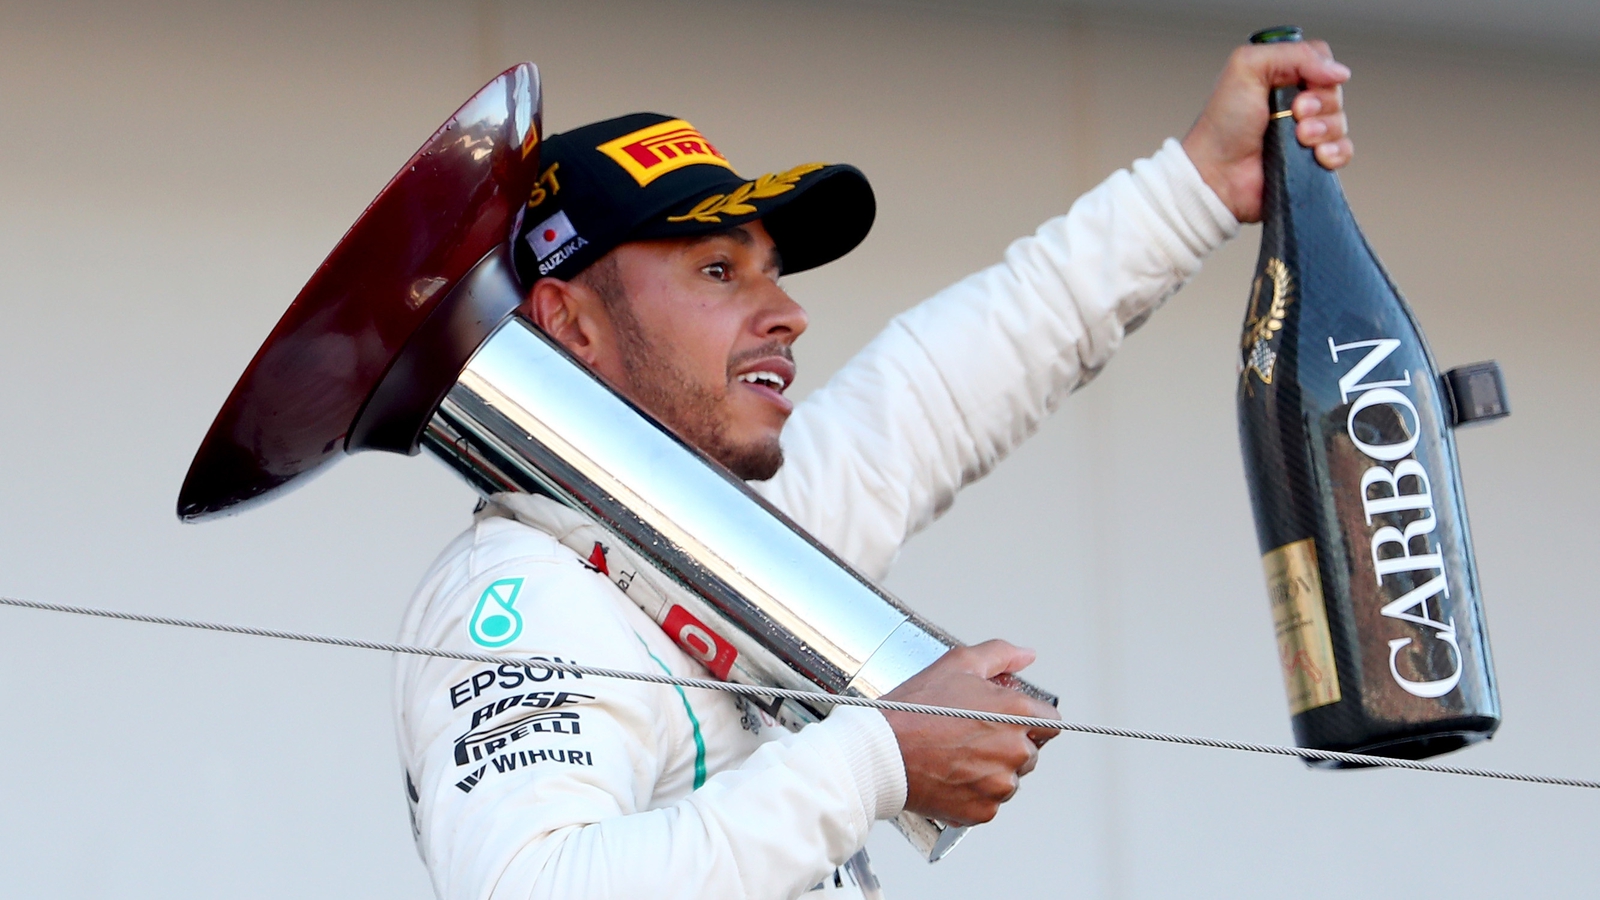 Hamilton wins in Japan and moves closer to F1 title